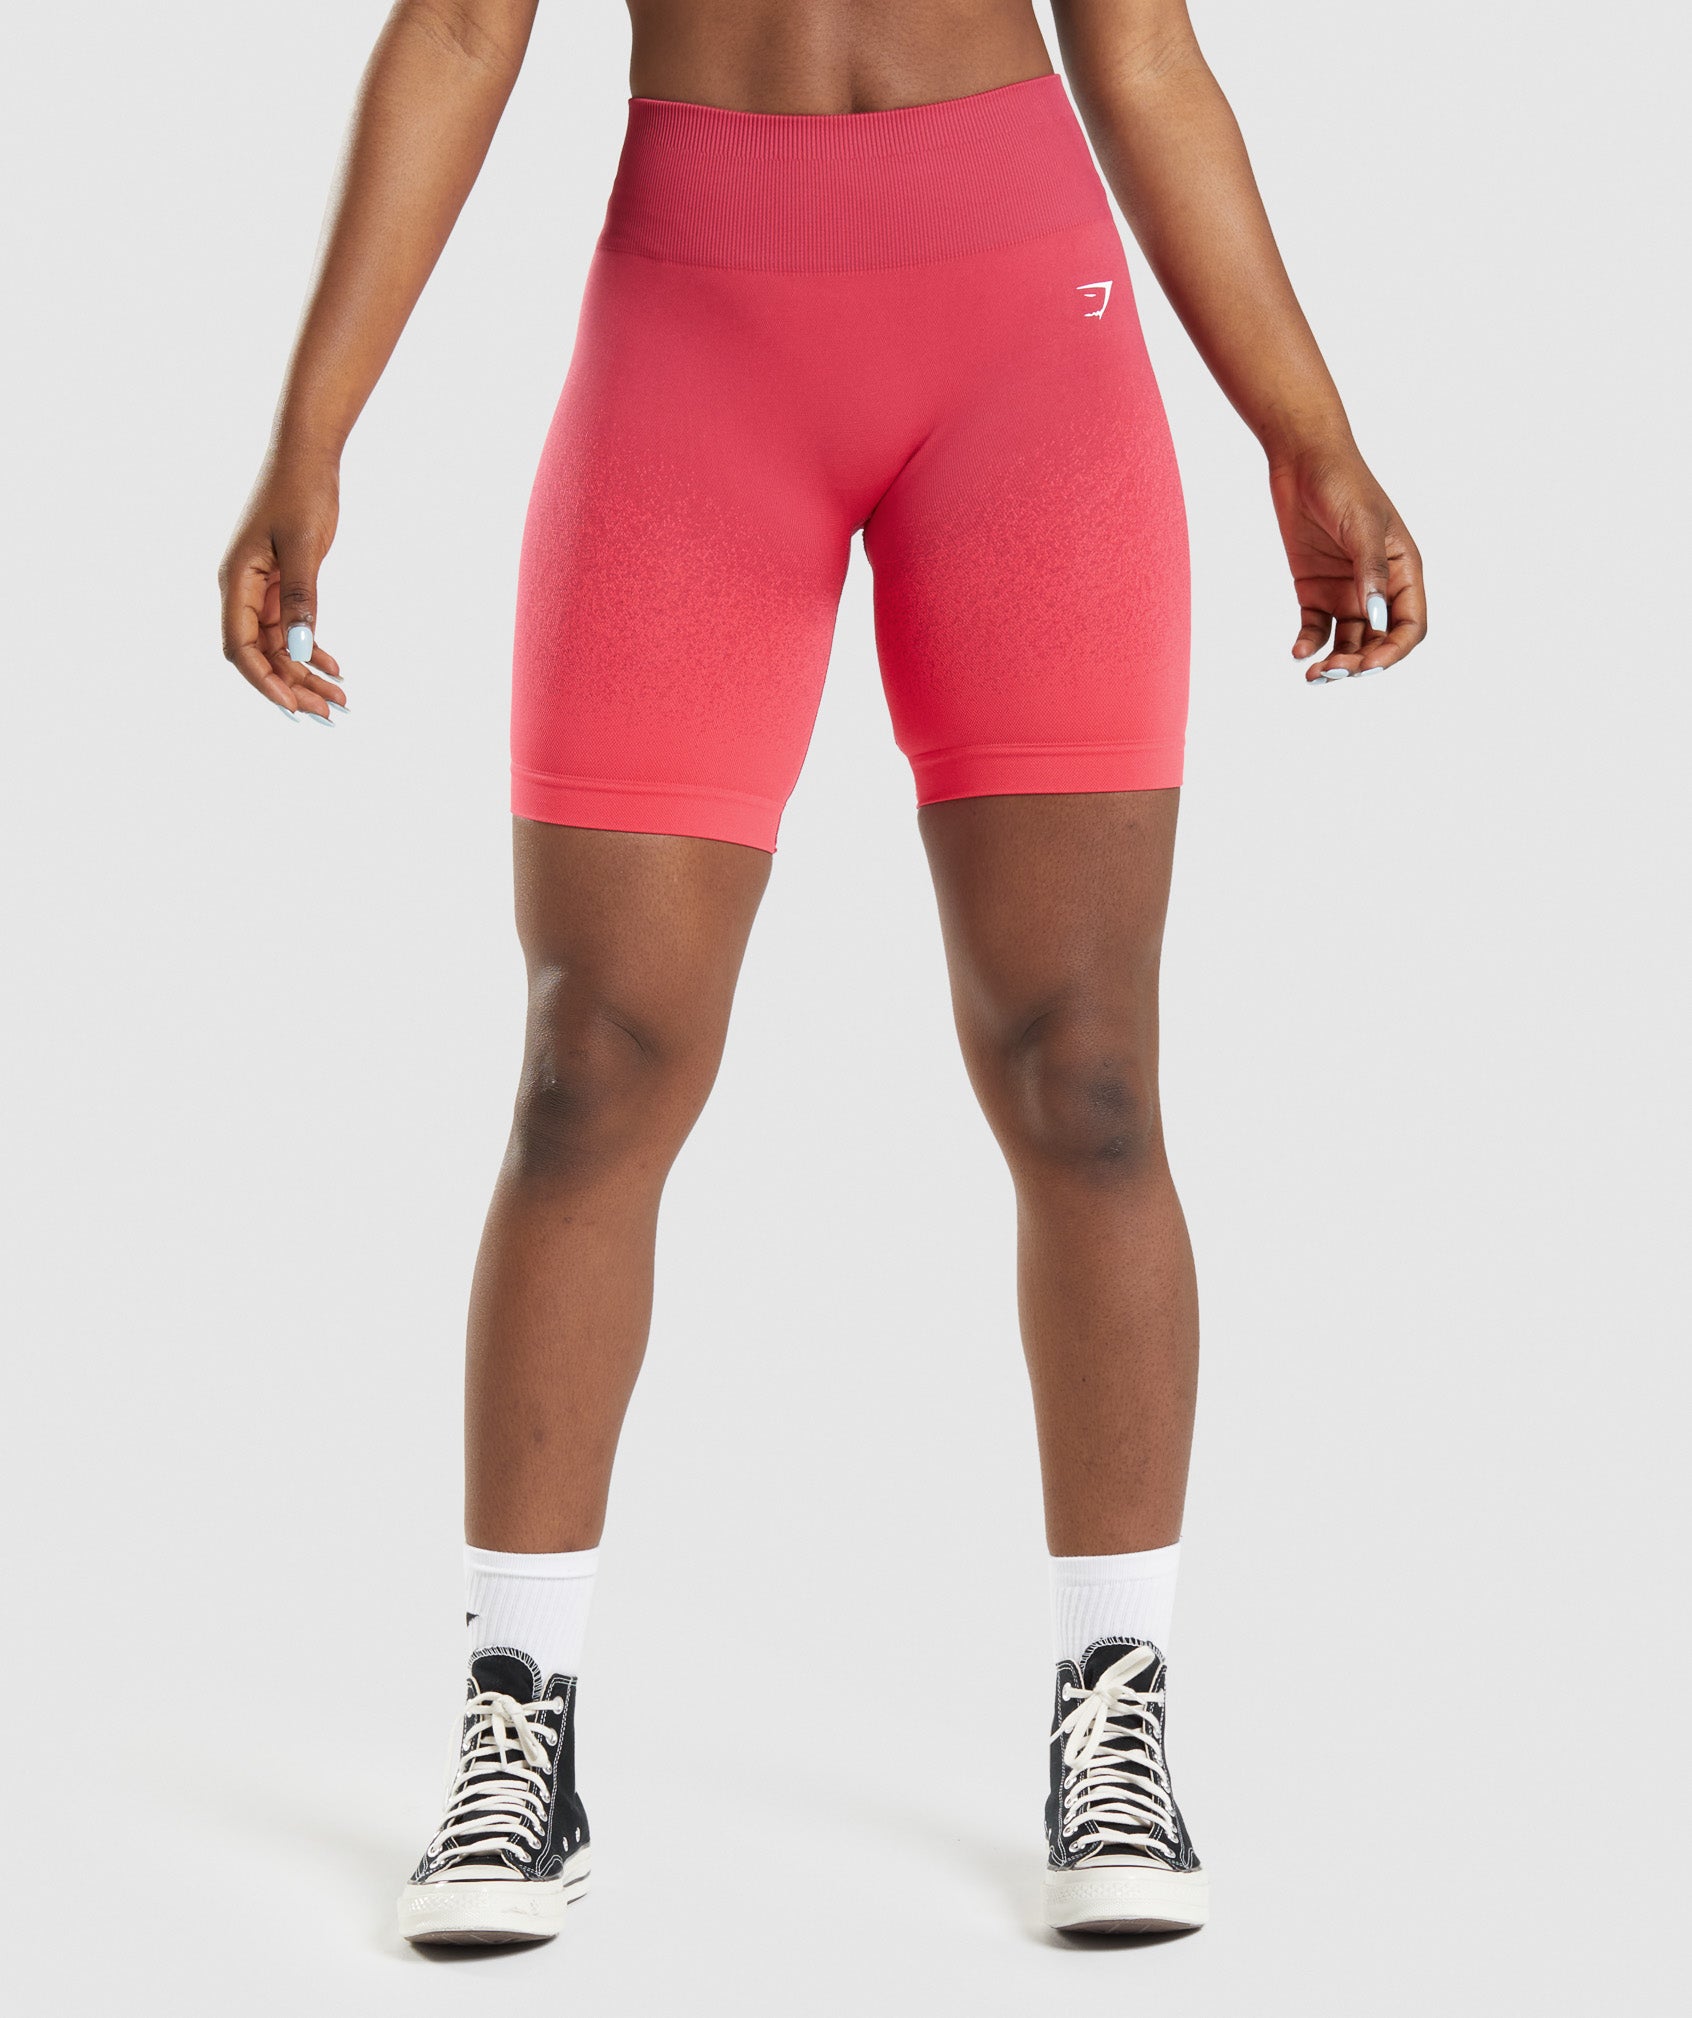 Adapt Ombre Seamless Cycling Shorts in Pink/Red - view 1